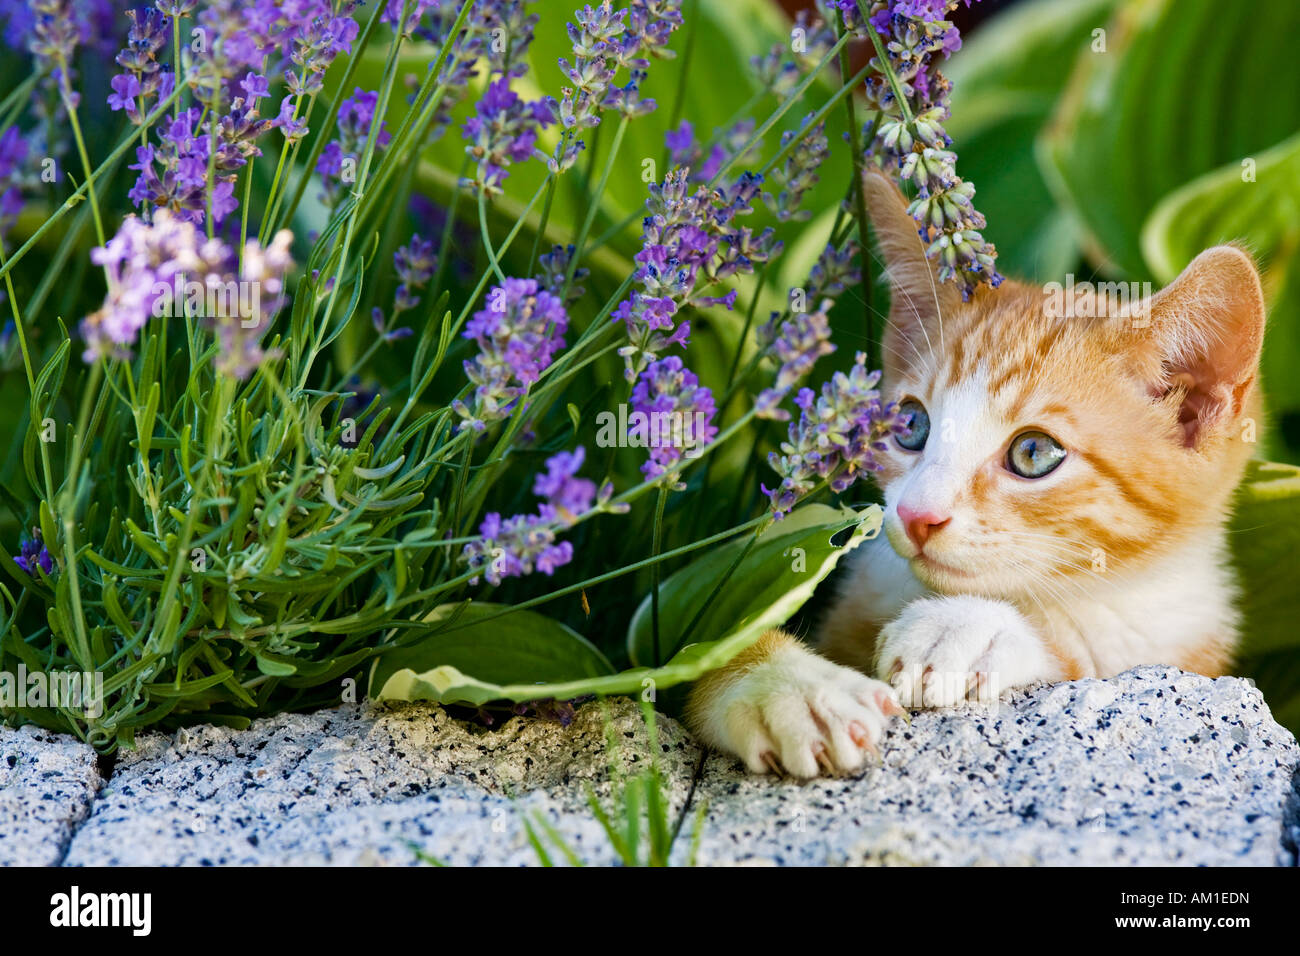 European shorthair cat with flowers Stock Photo